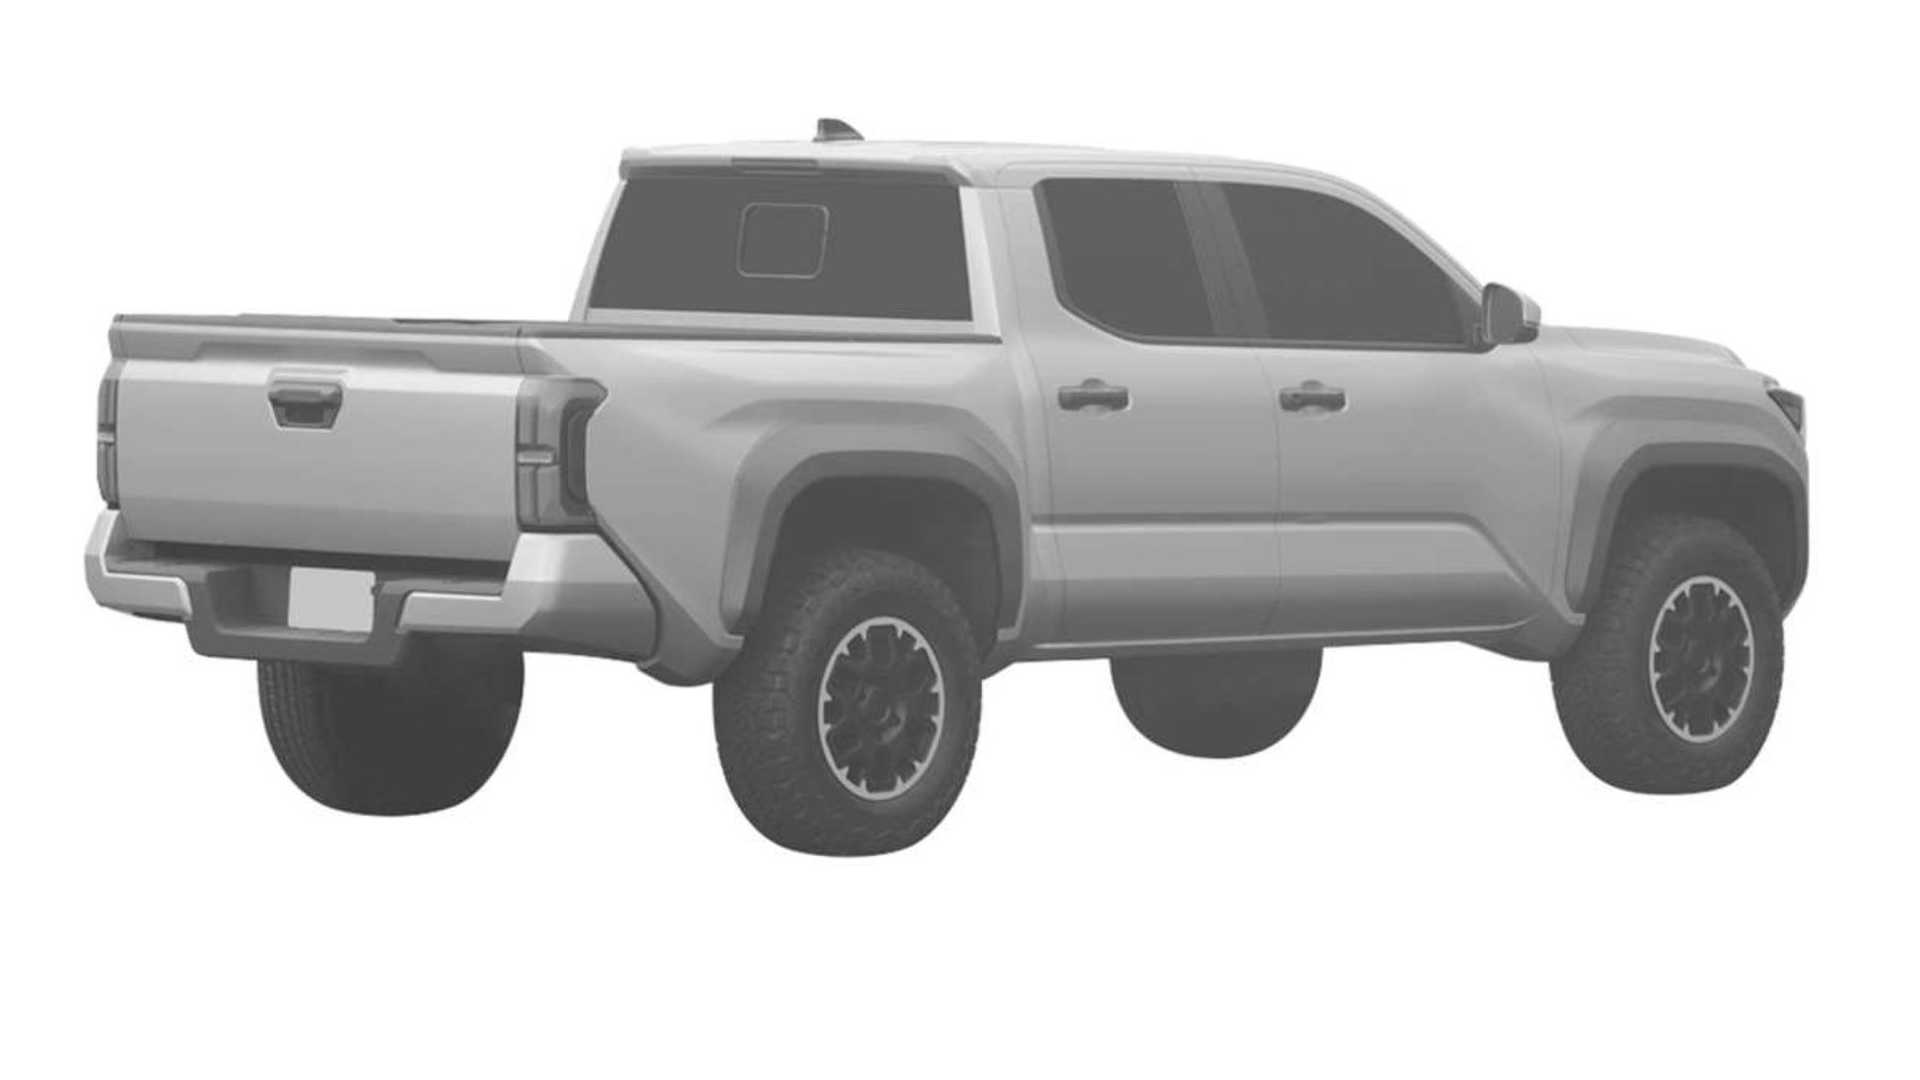 2024 Tacoma 2024 Tacoma Design Images Revealed in Patent! 📸 🕵🏻‍♂️ 2024 Toyota Tacoma 4th gen patent design 5